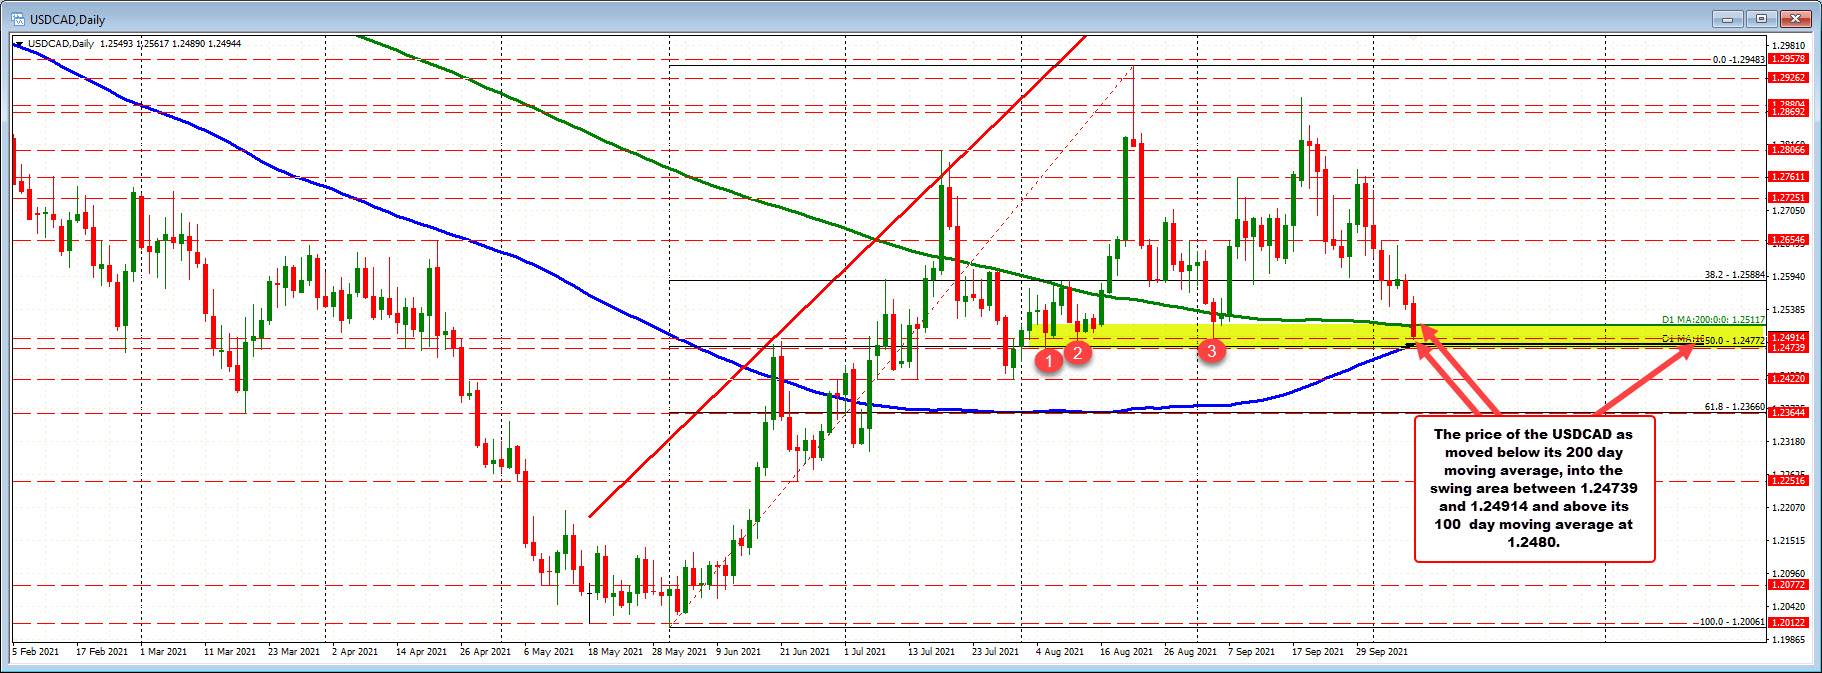 Canada jobs report better. US jobs report worse. USDCAD moves lower